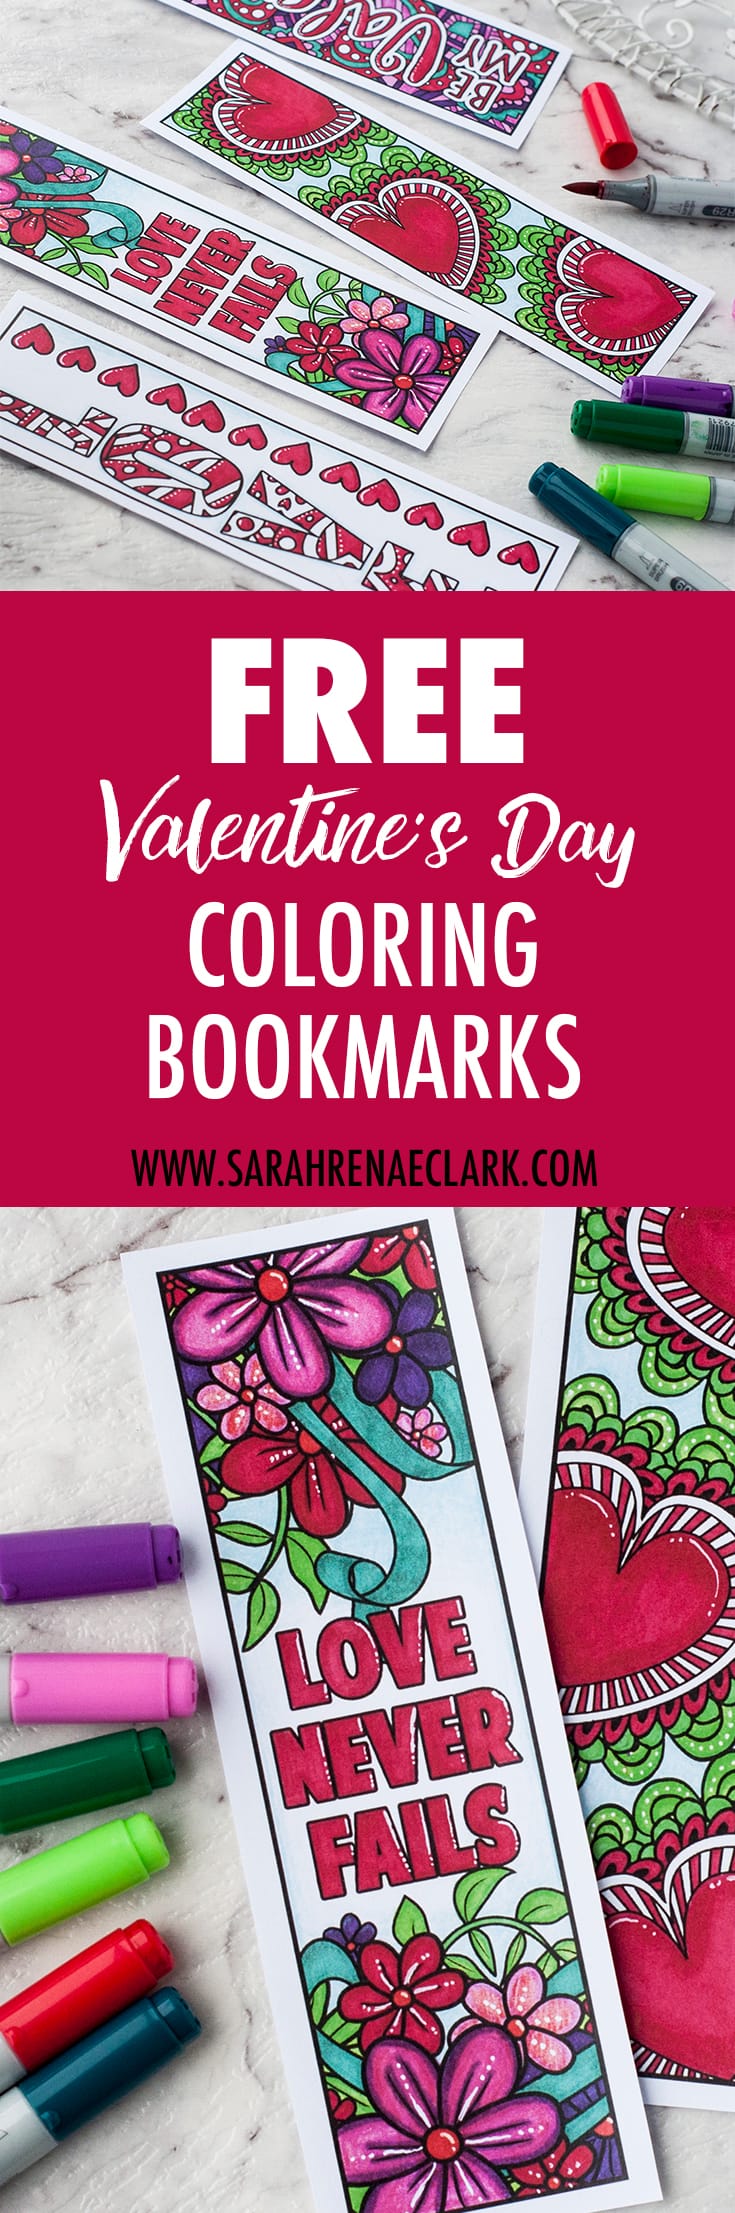 free-printable-valentine-s-day-coloring-bookmarks